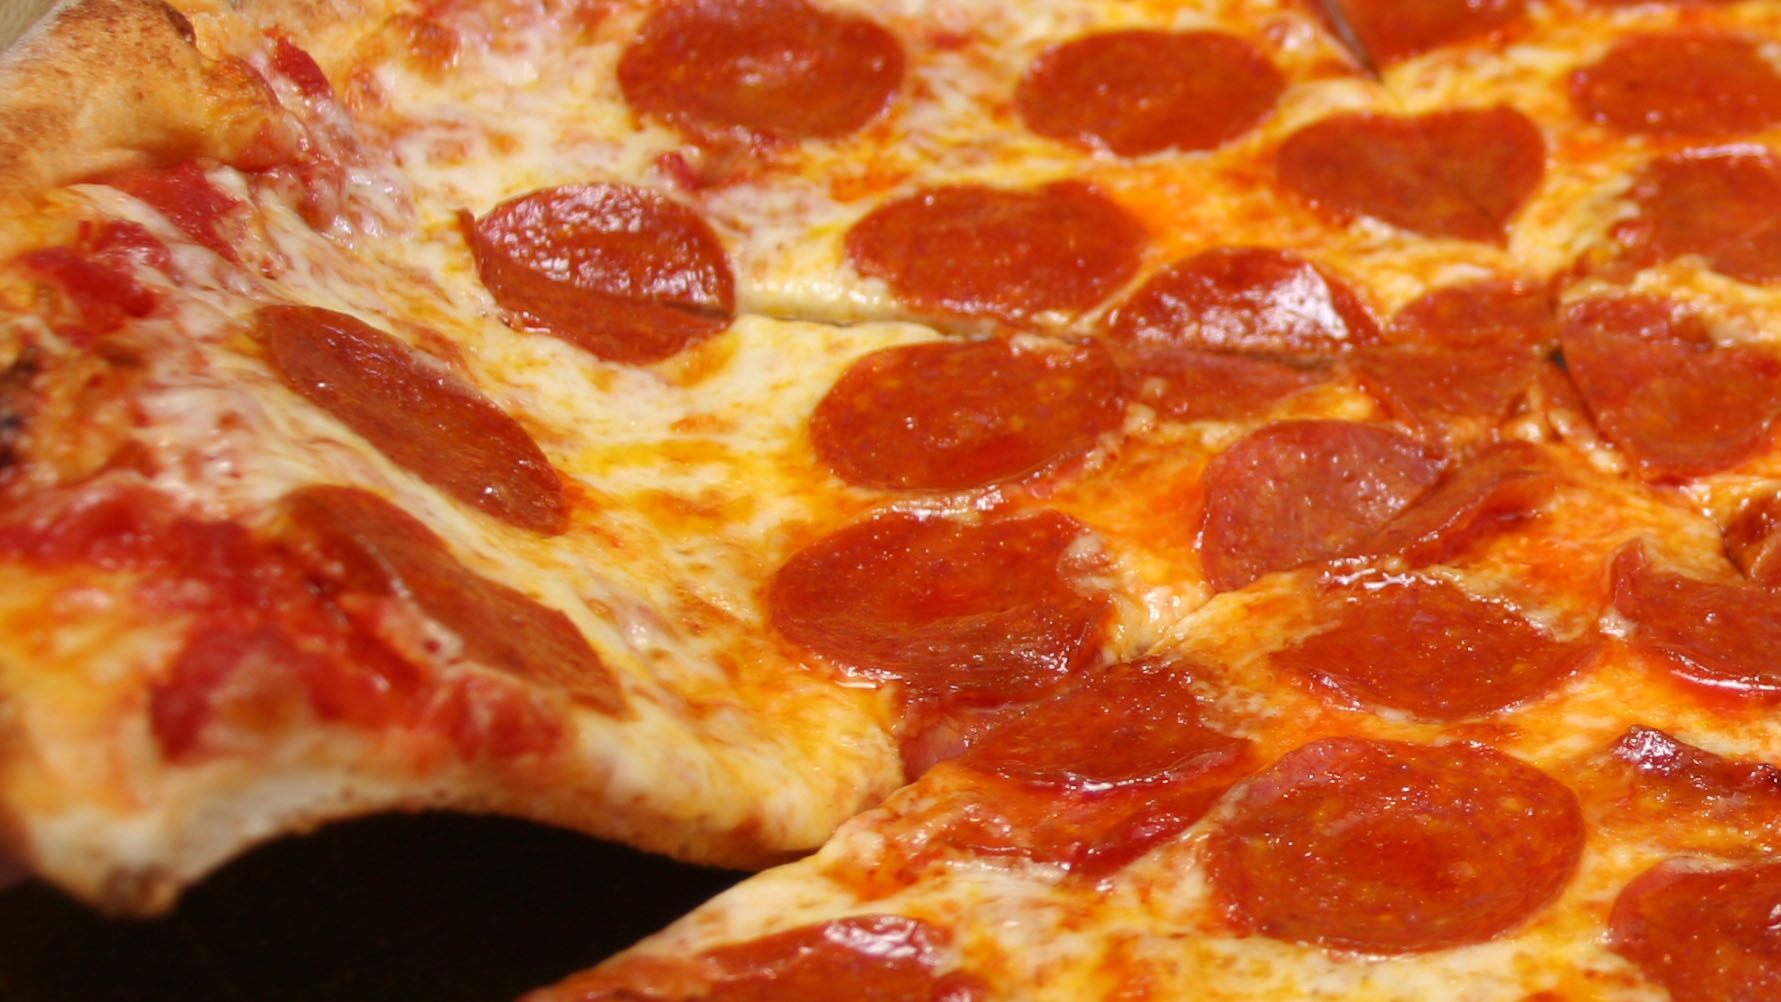 Pepperoni shortage strikes small pizza places across the US: report